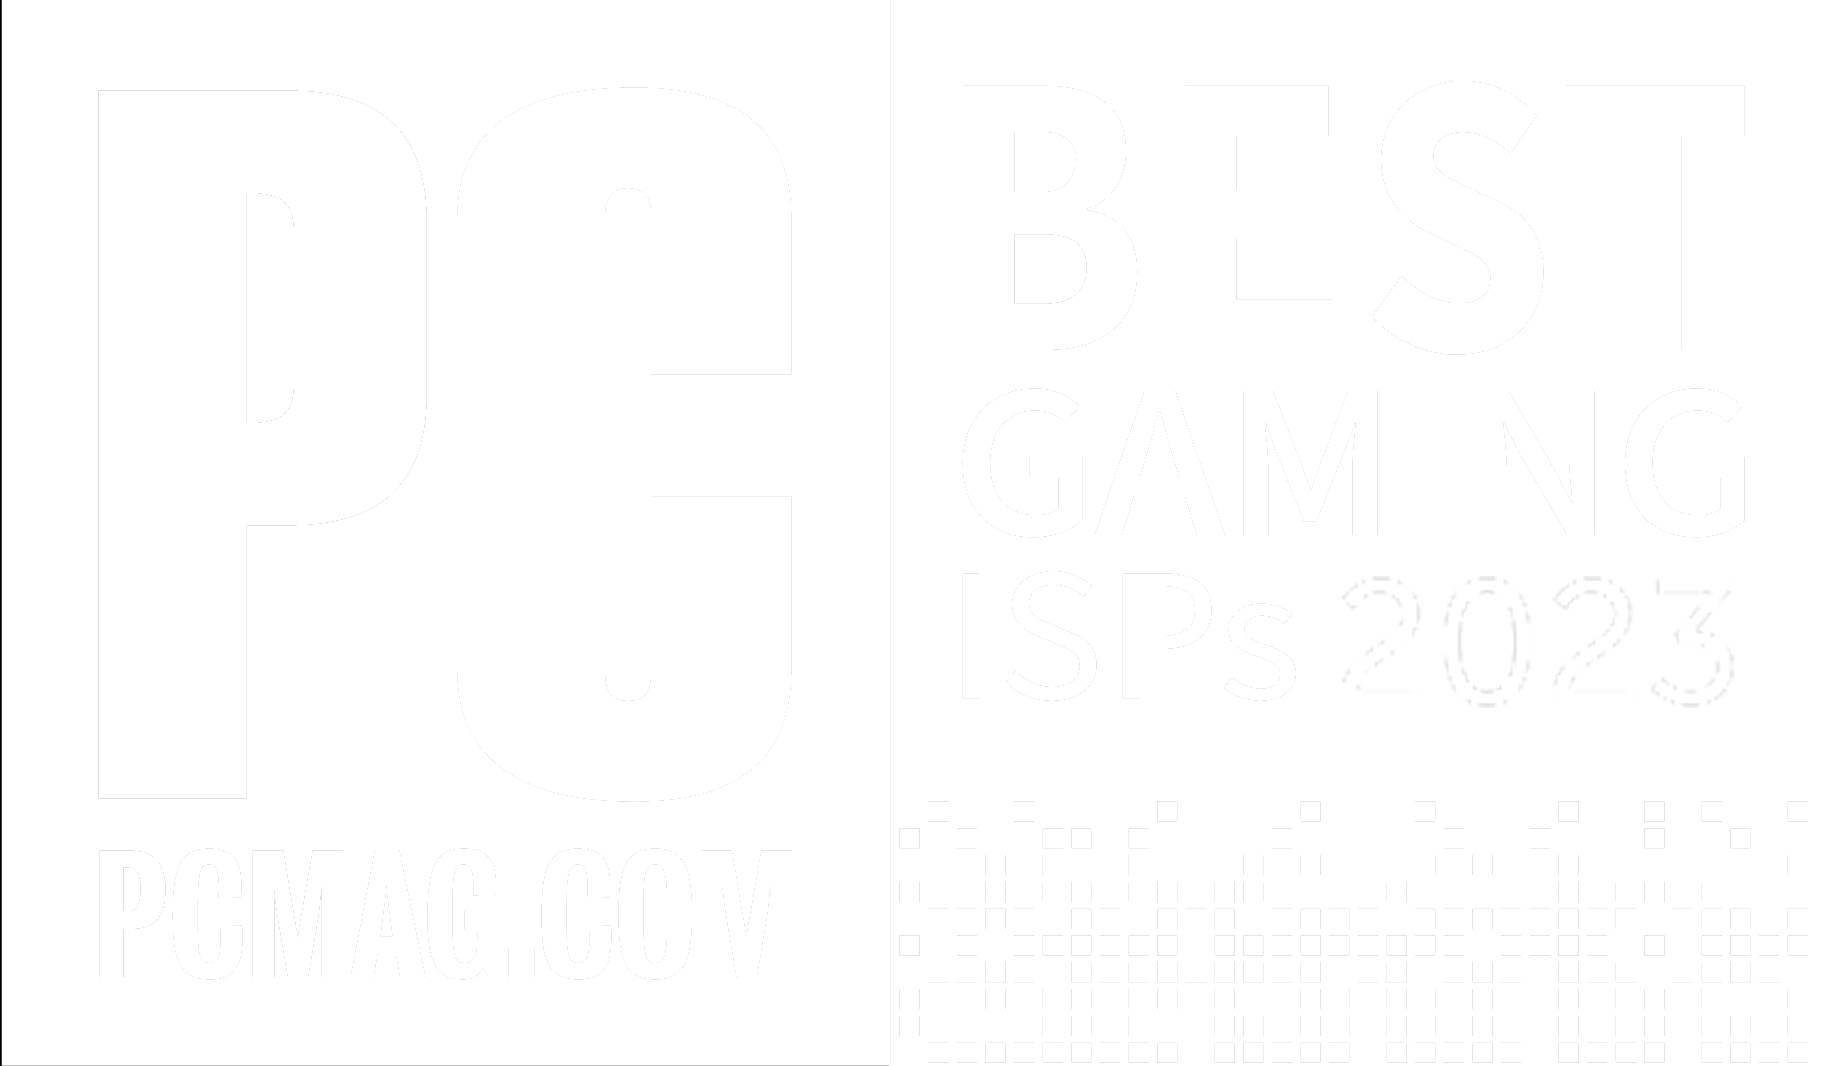 PCMag Best Gaming ISP 2023